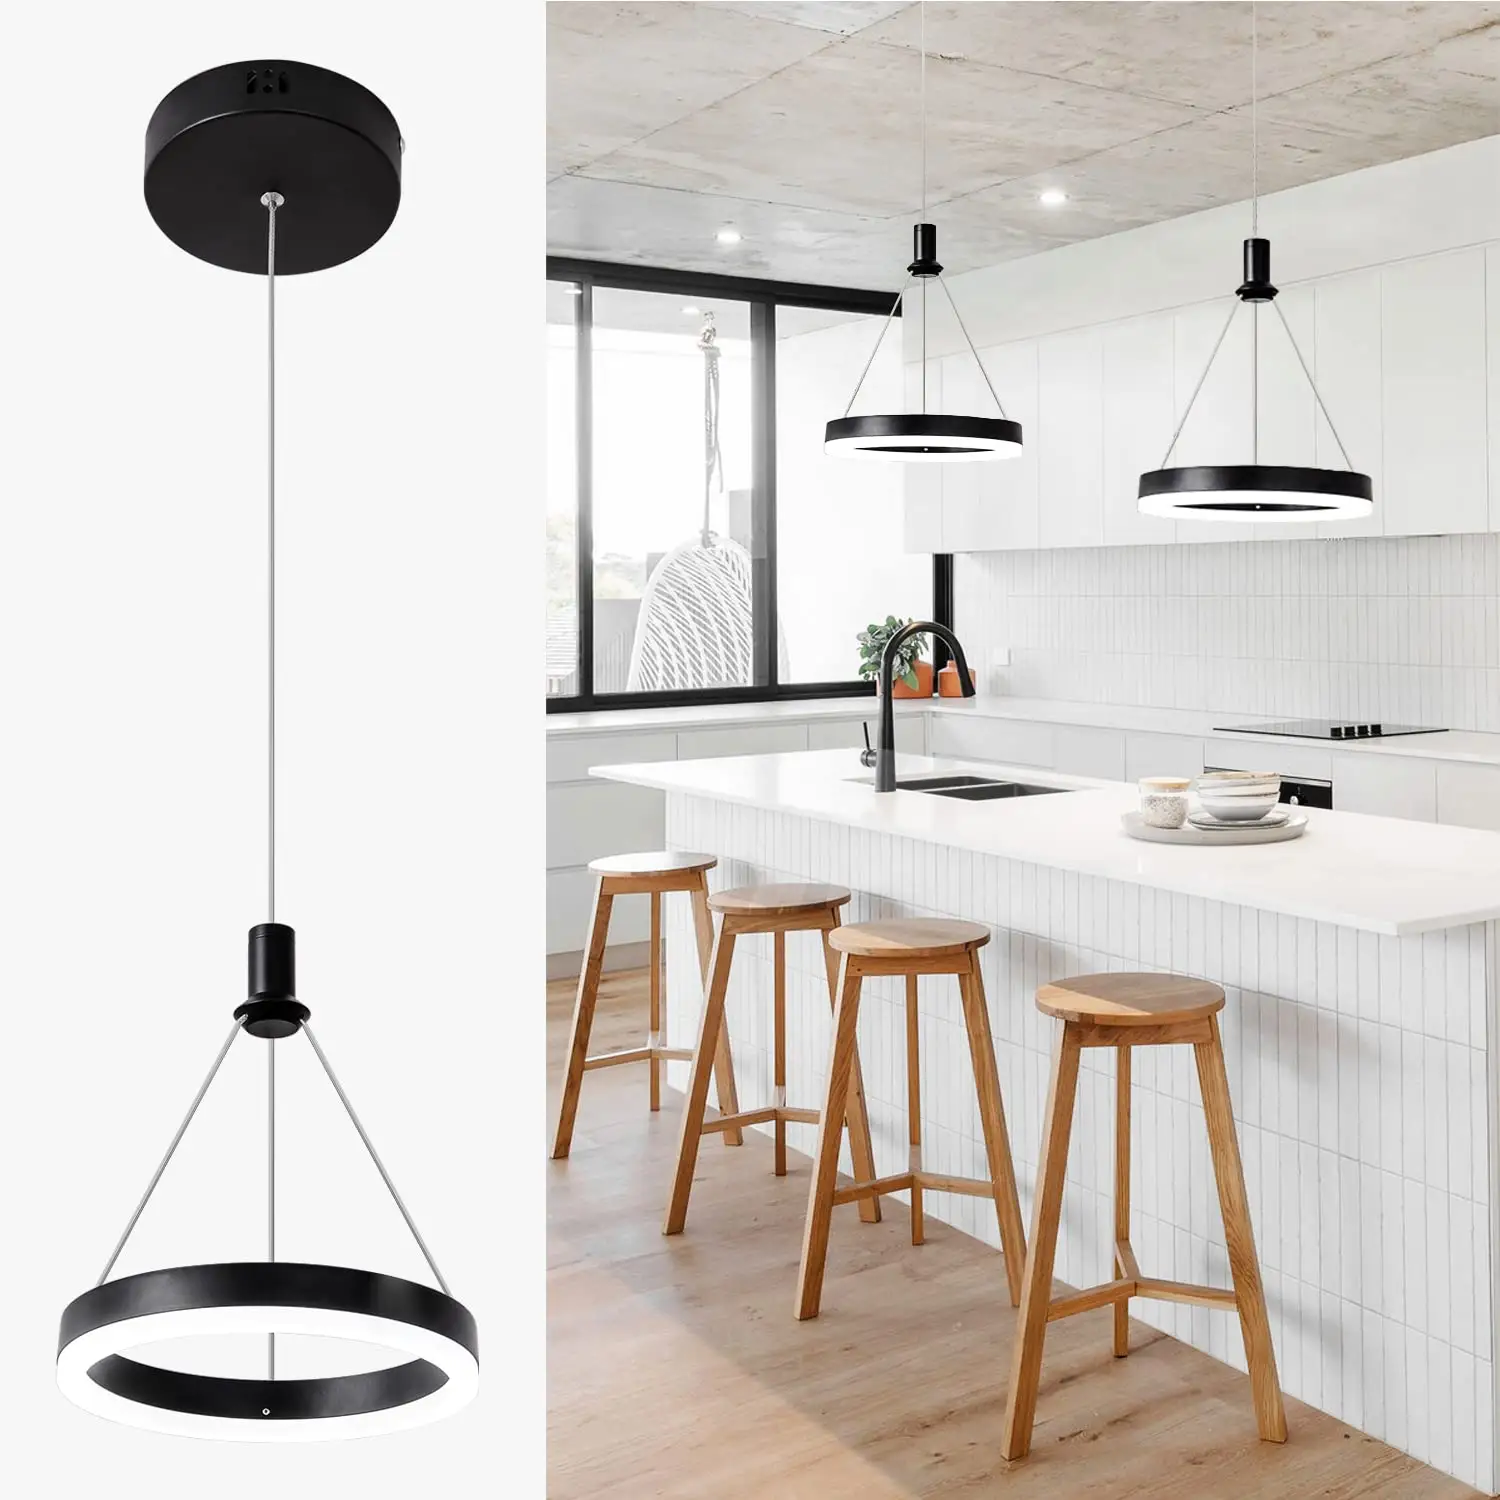 Modern Dining Room Black 15W 6000K Cool White Dimmable Chandelier For Kitchen Island Adjustable Hanging Pendant Light Fixtures